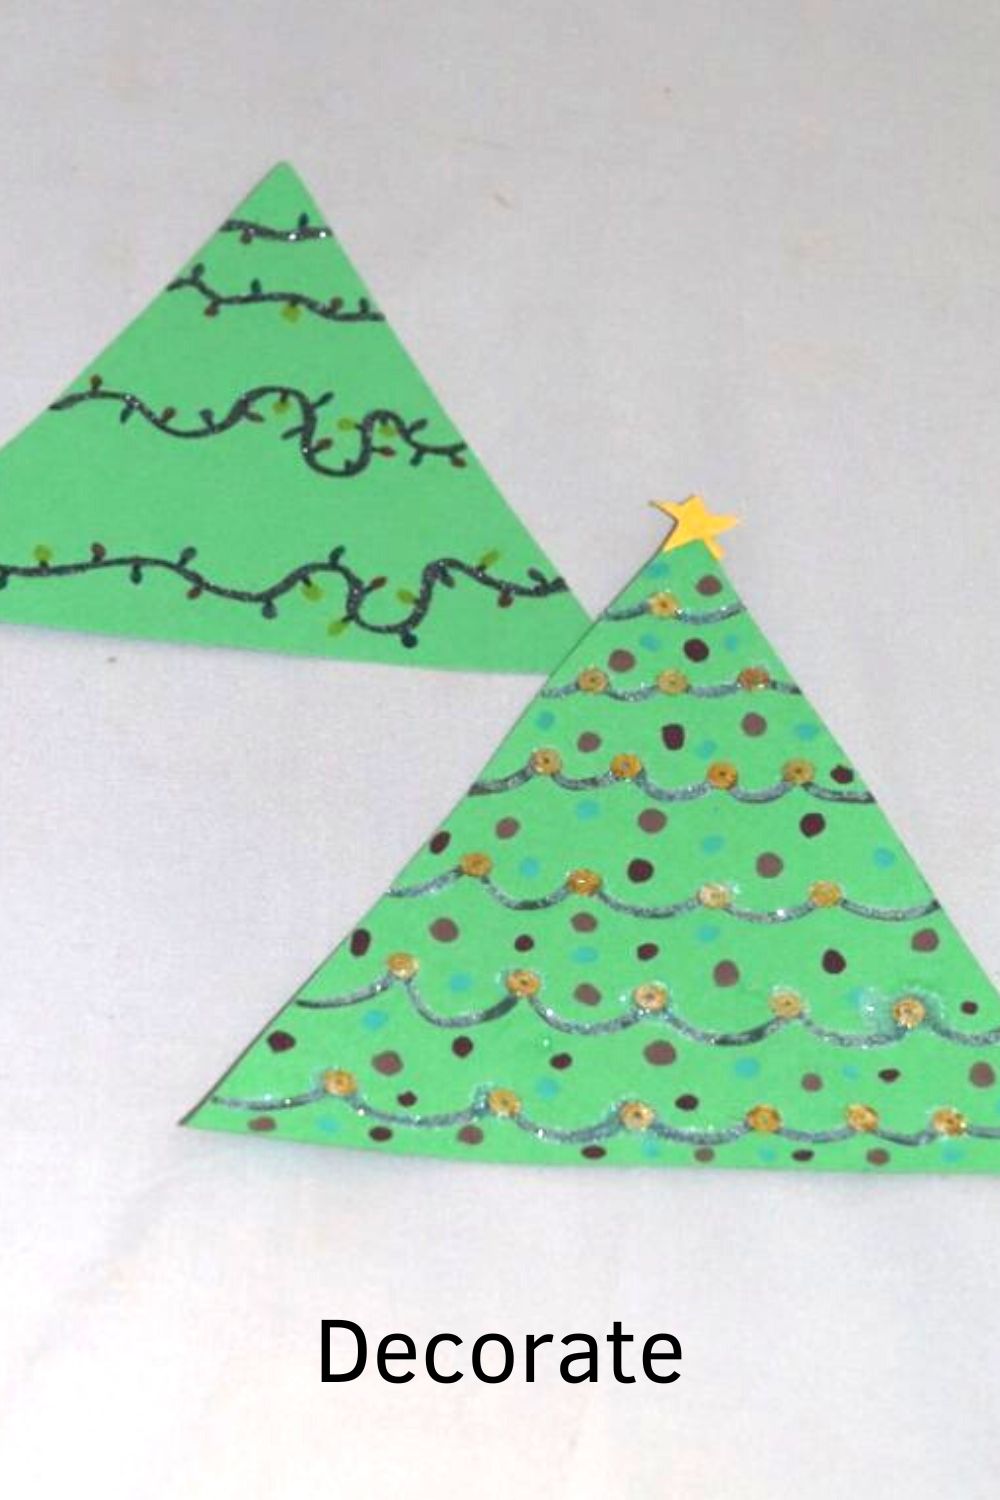 decorate the triangle Christmas tree